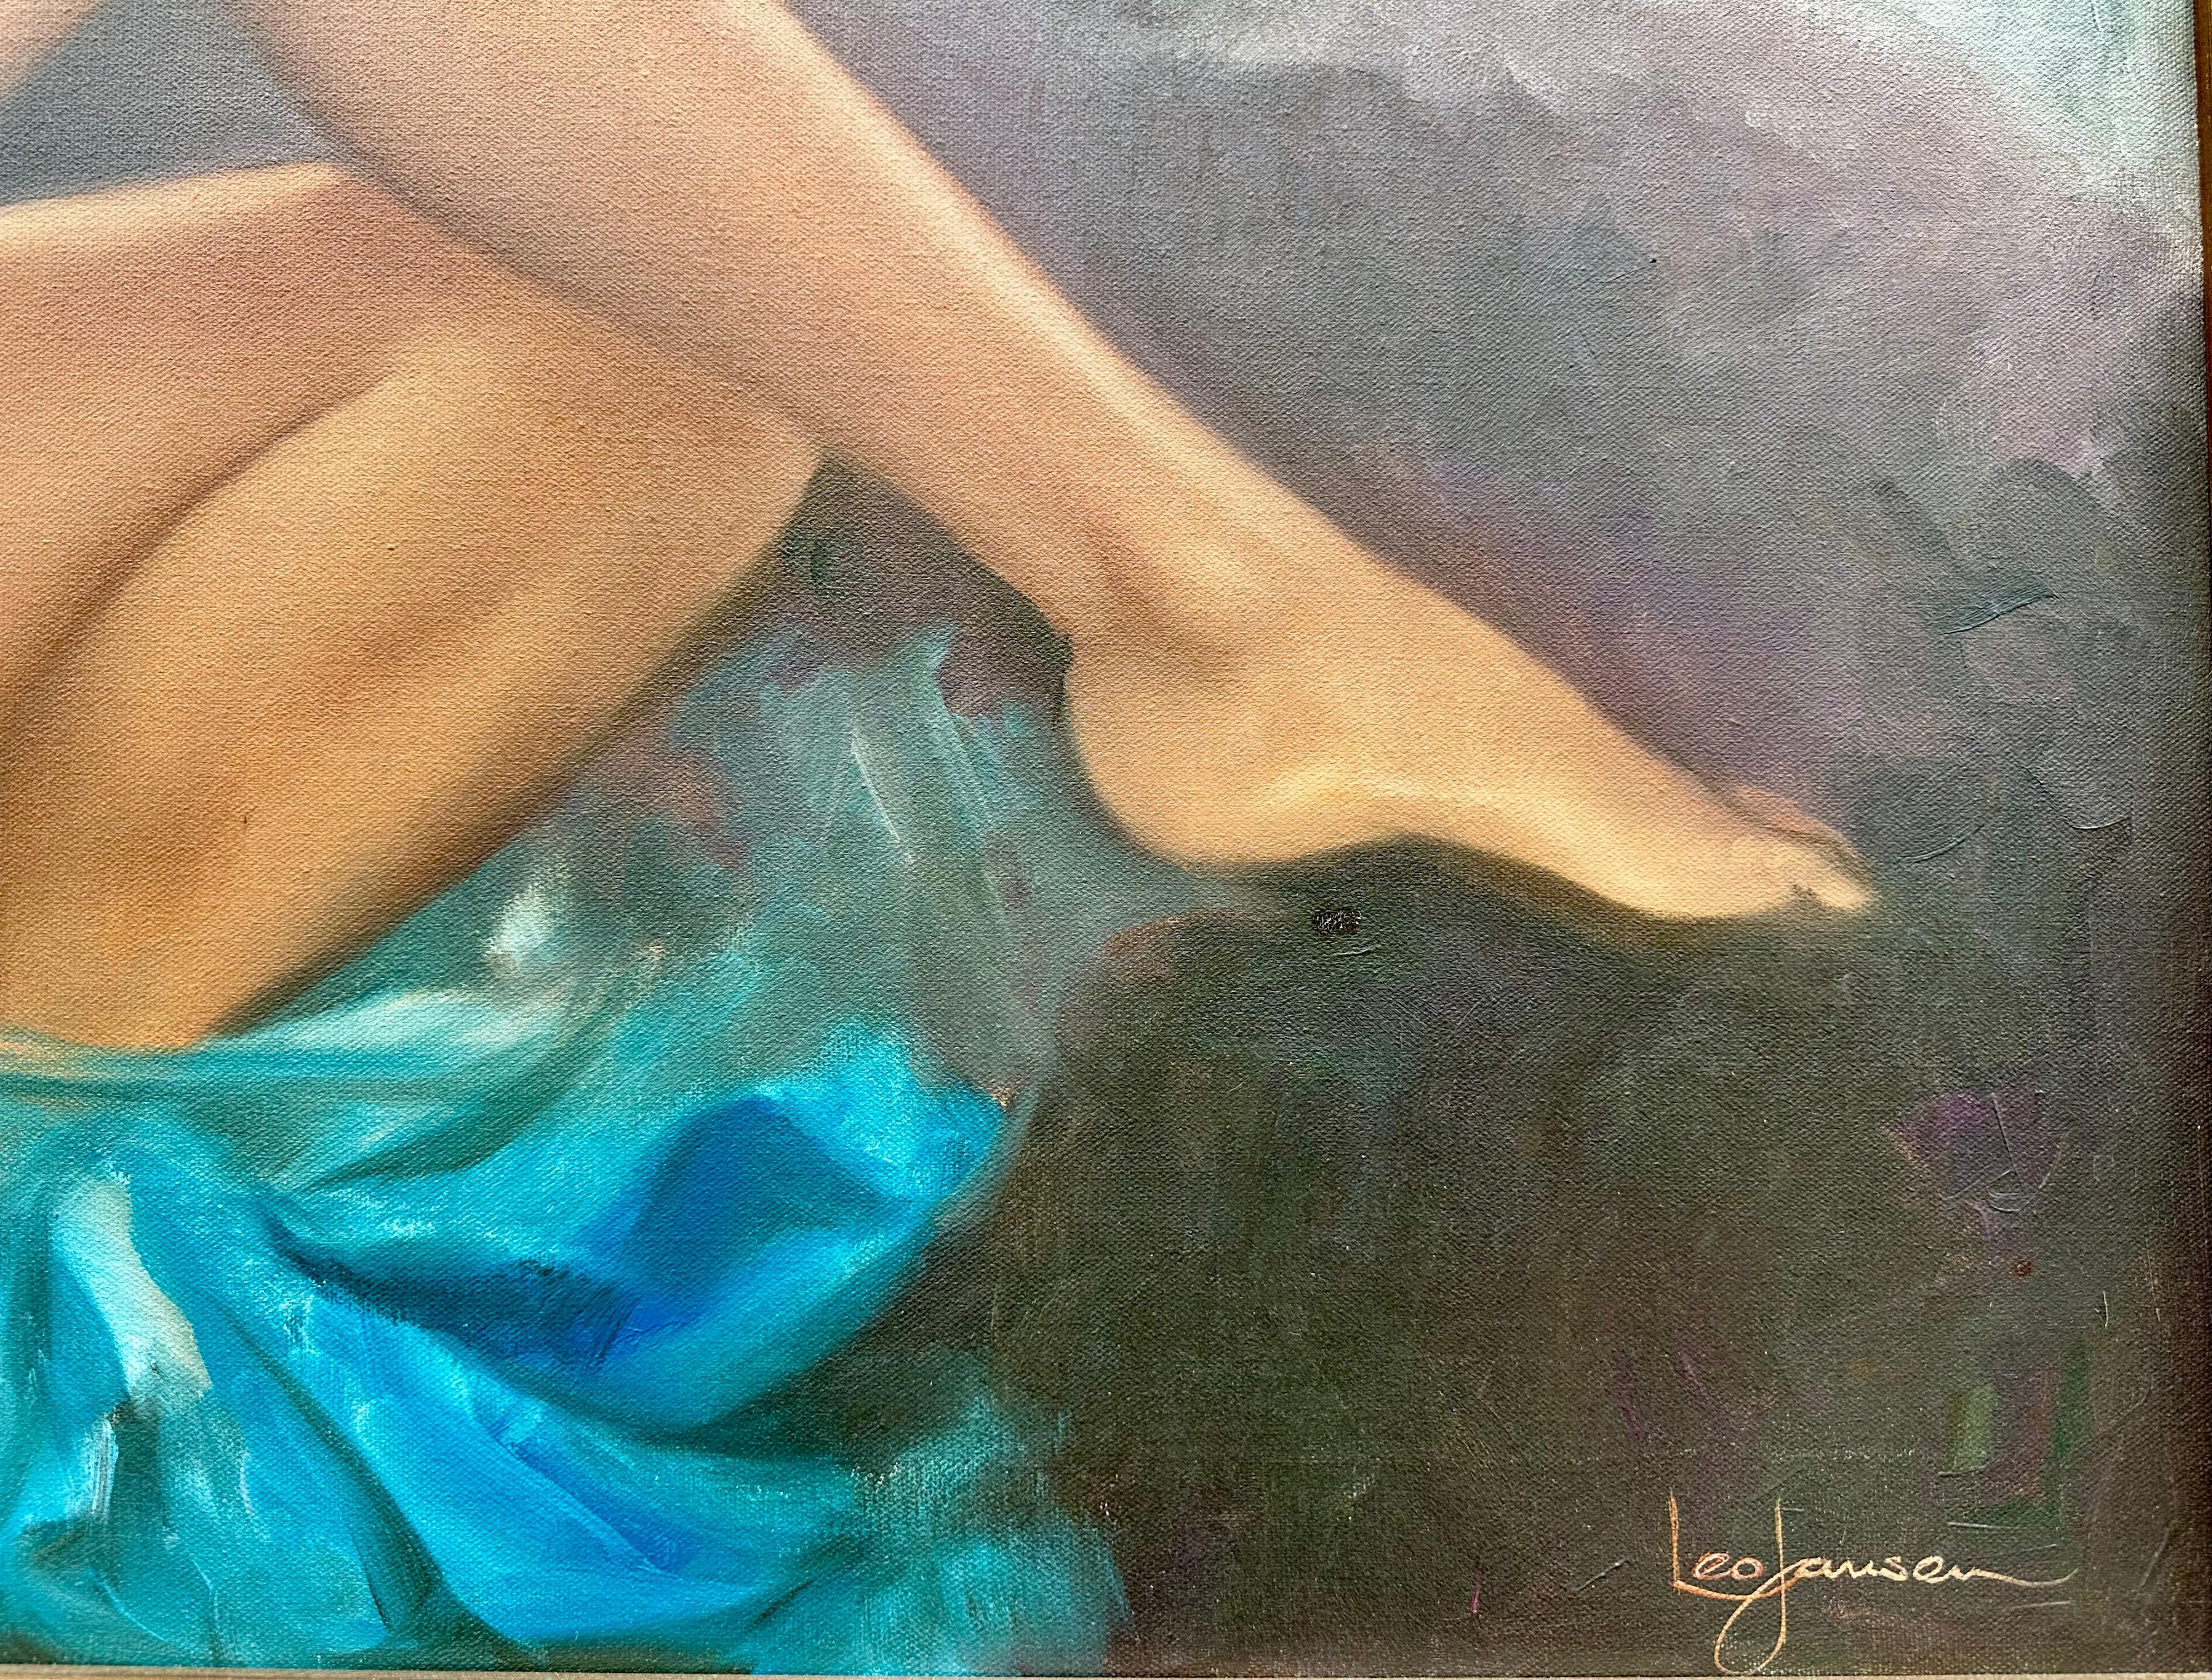 American Large Original Playboy Artist Leo Jansen Oil Painting of a Reclining Nude Woman For Sale